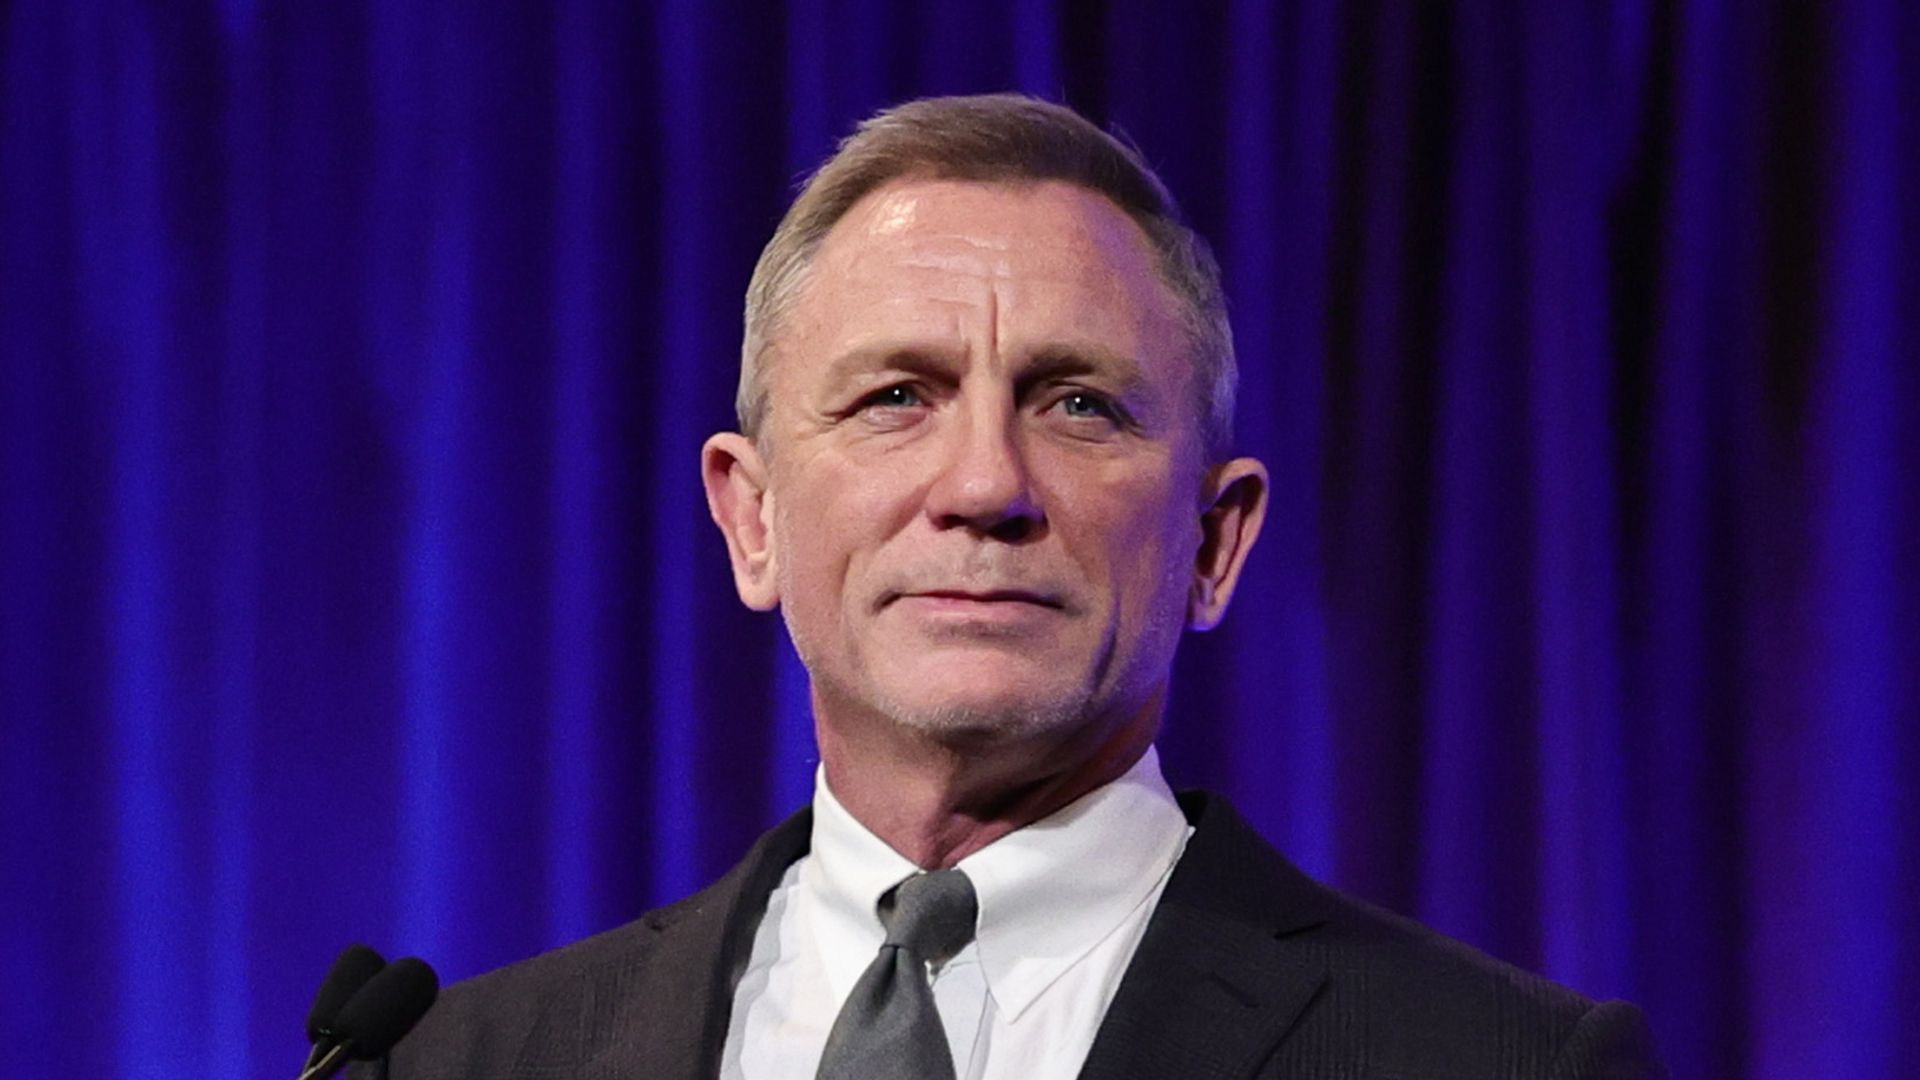 Daniel Craig speaks onstage during the National Board Of Review 2023 Awards Gala at Cipriani 42nd Street on January 08, 2023 in New York City.